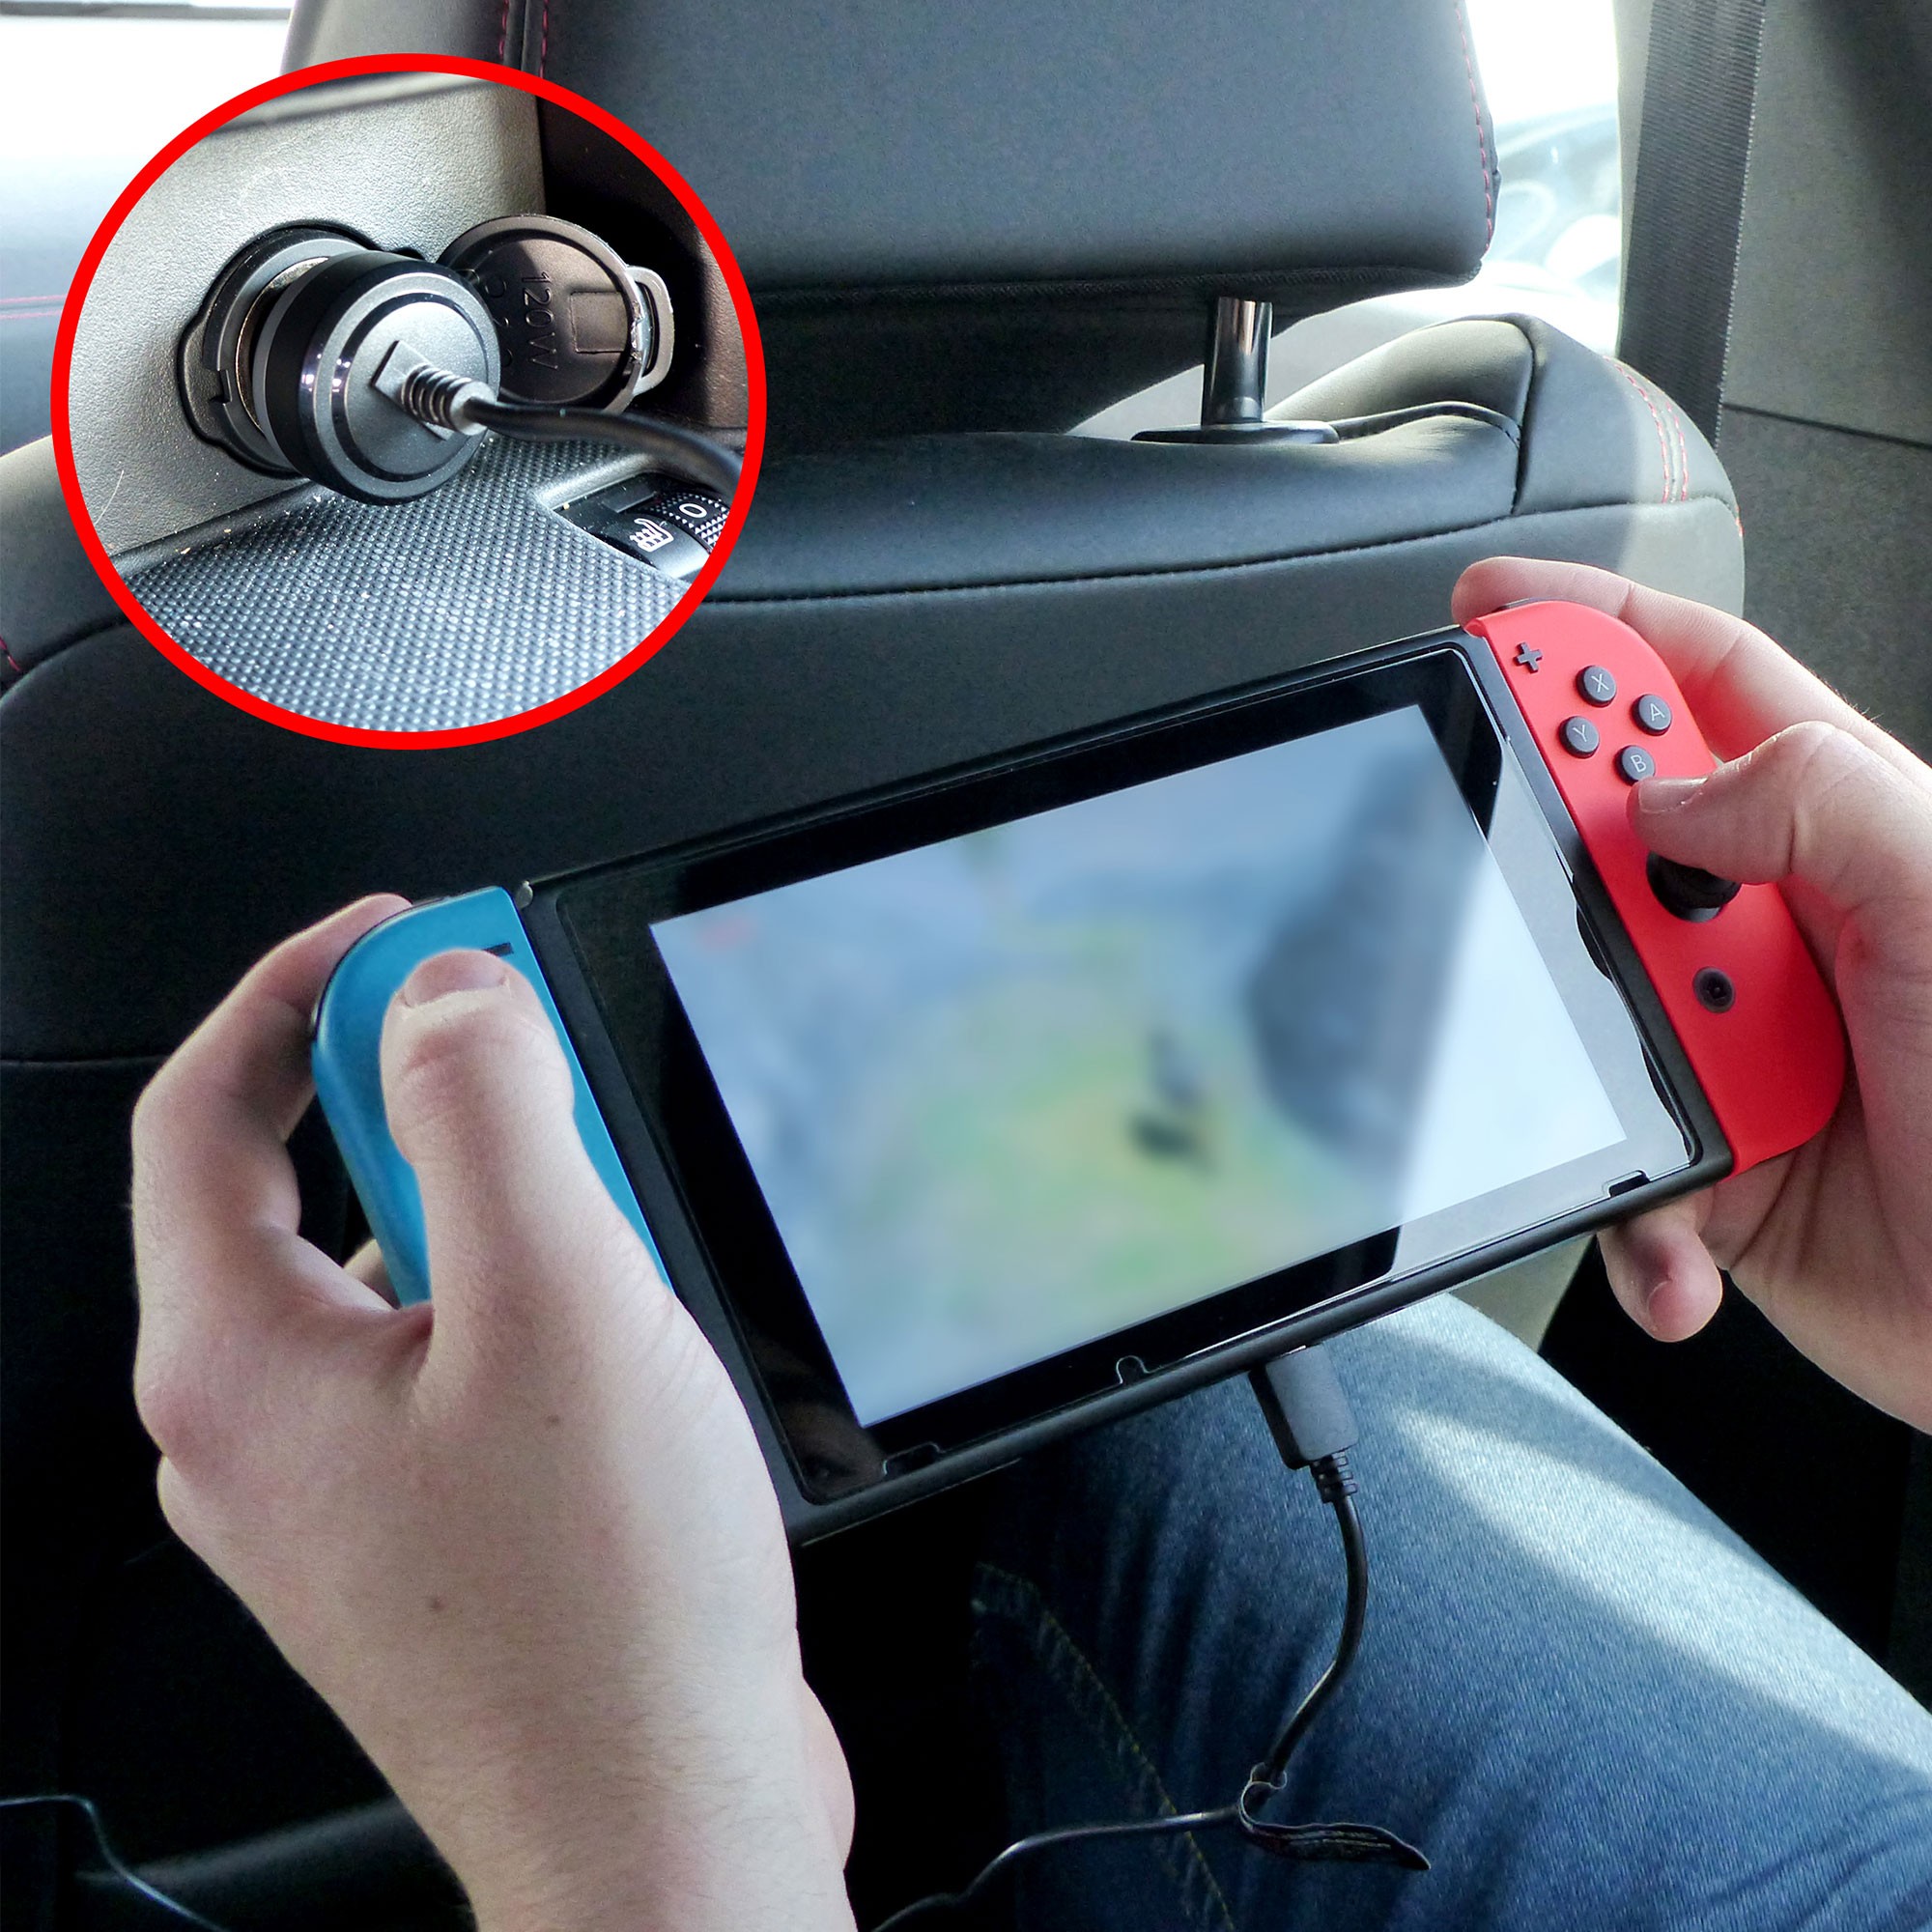 Usb-c car charger for Nintendo Switch, Lite, Oled